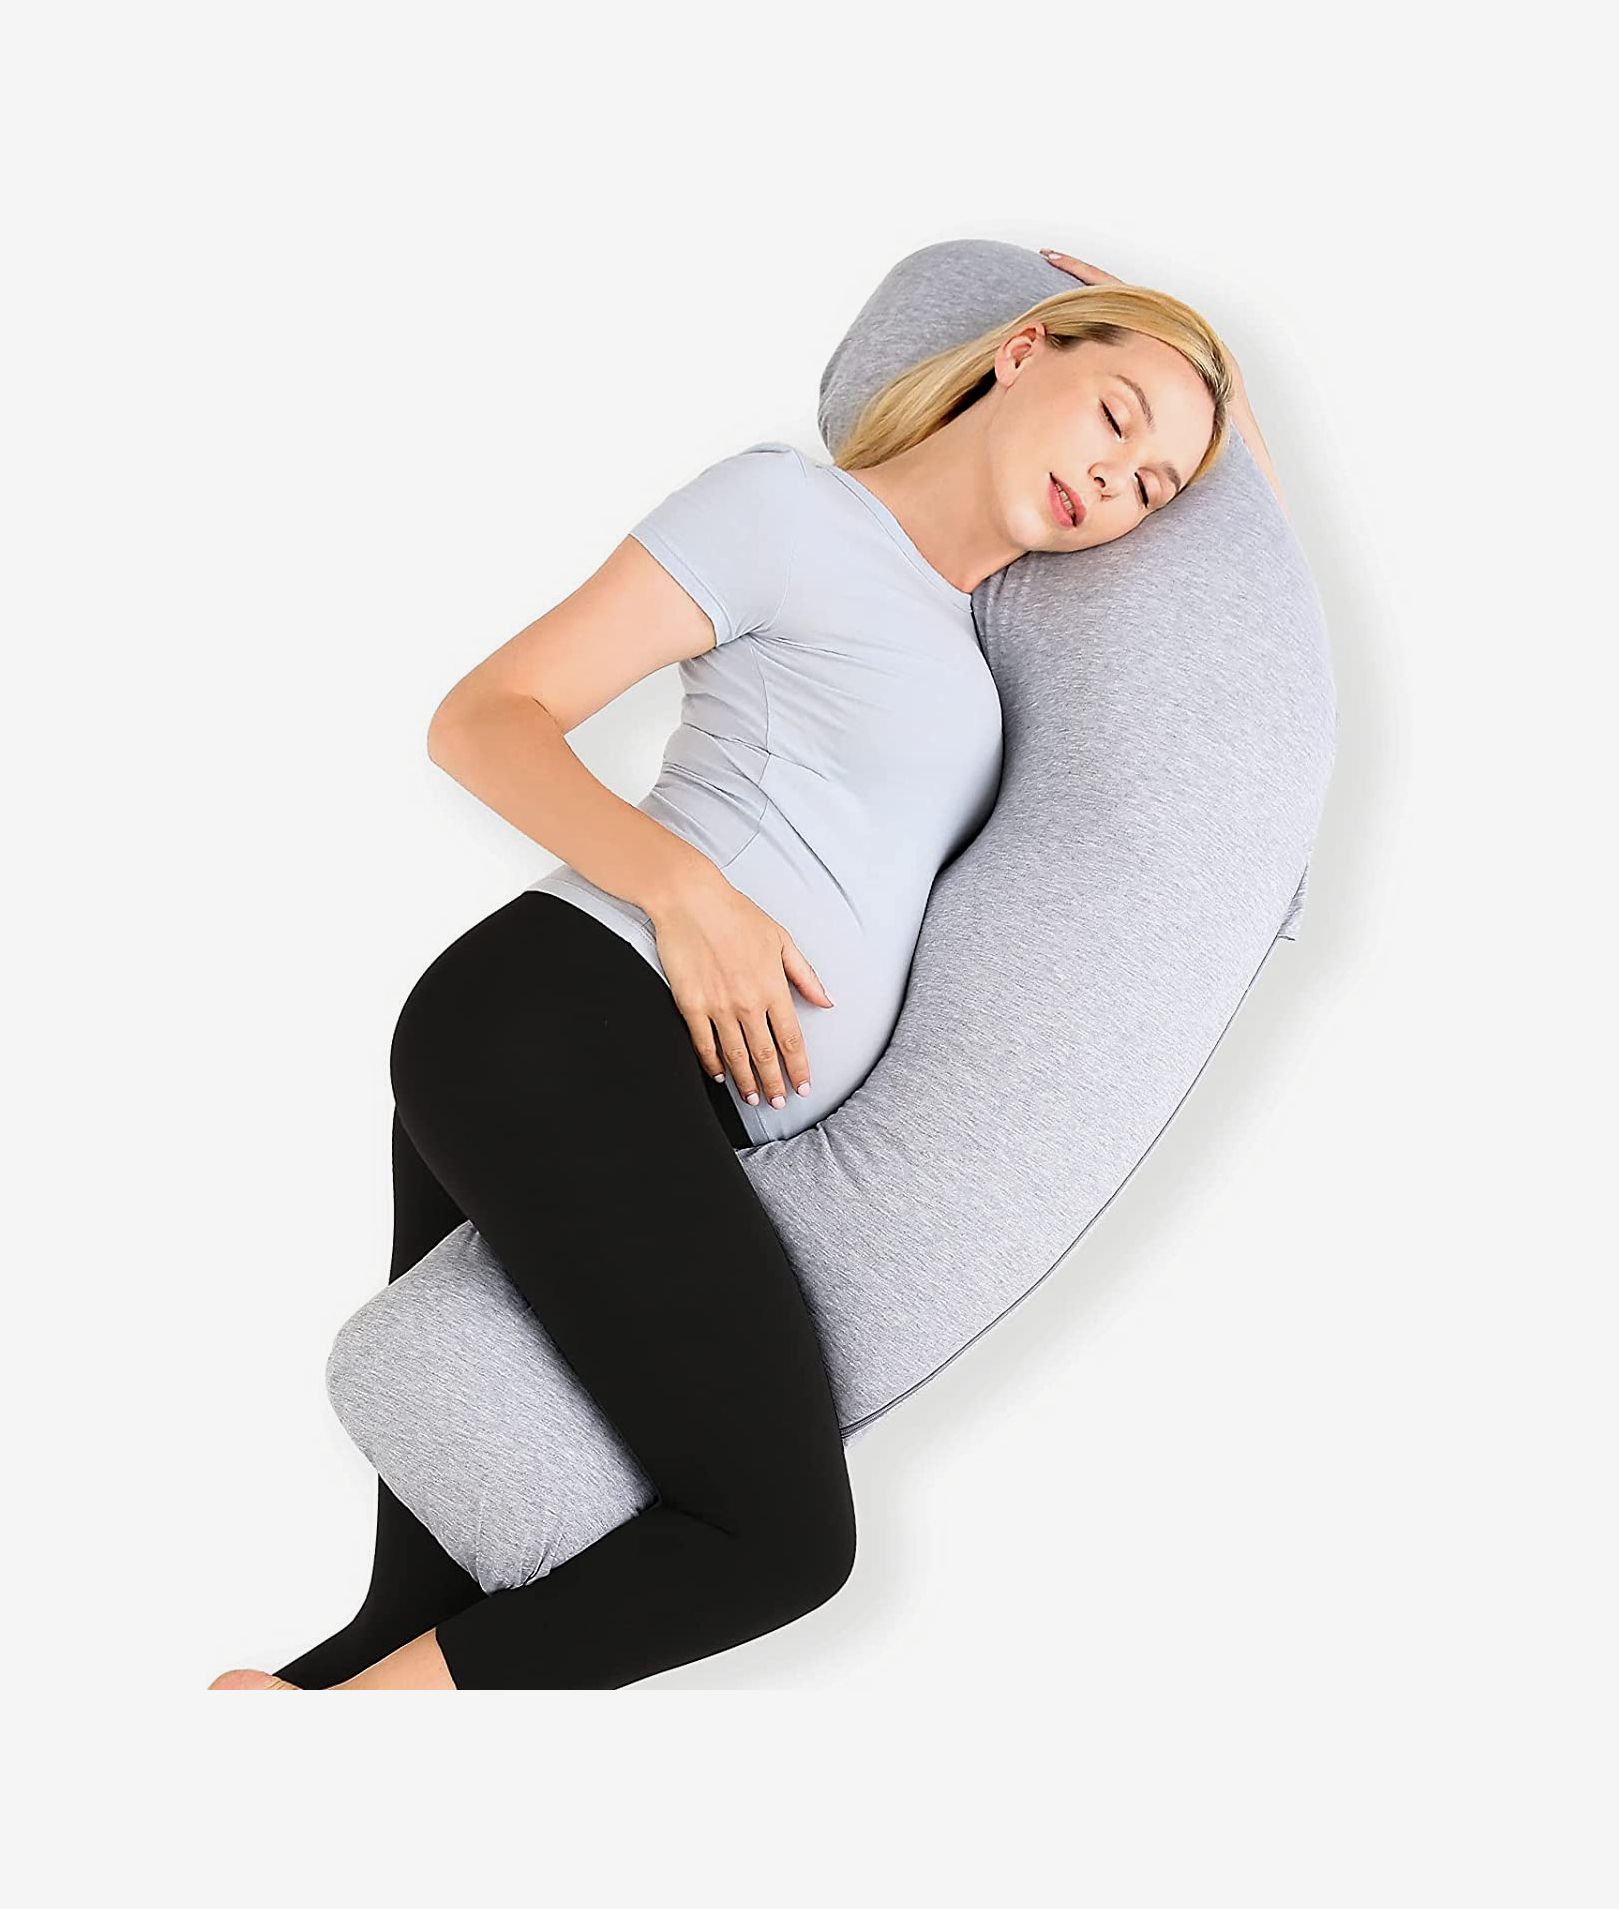 Choice of Cover Maternity Pregnancy Baby Body Support Cushion Bolster Pillow 